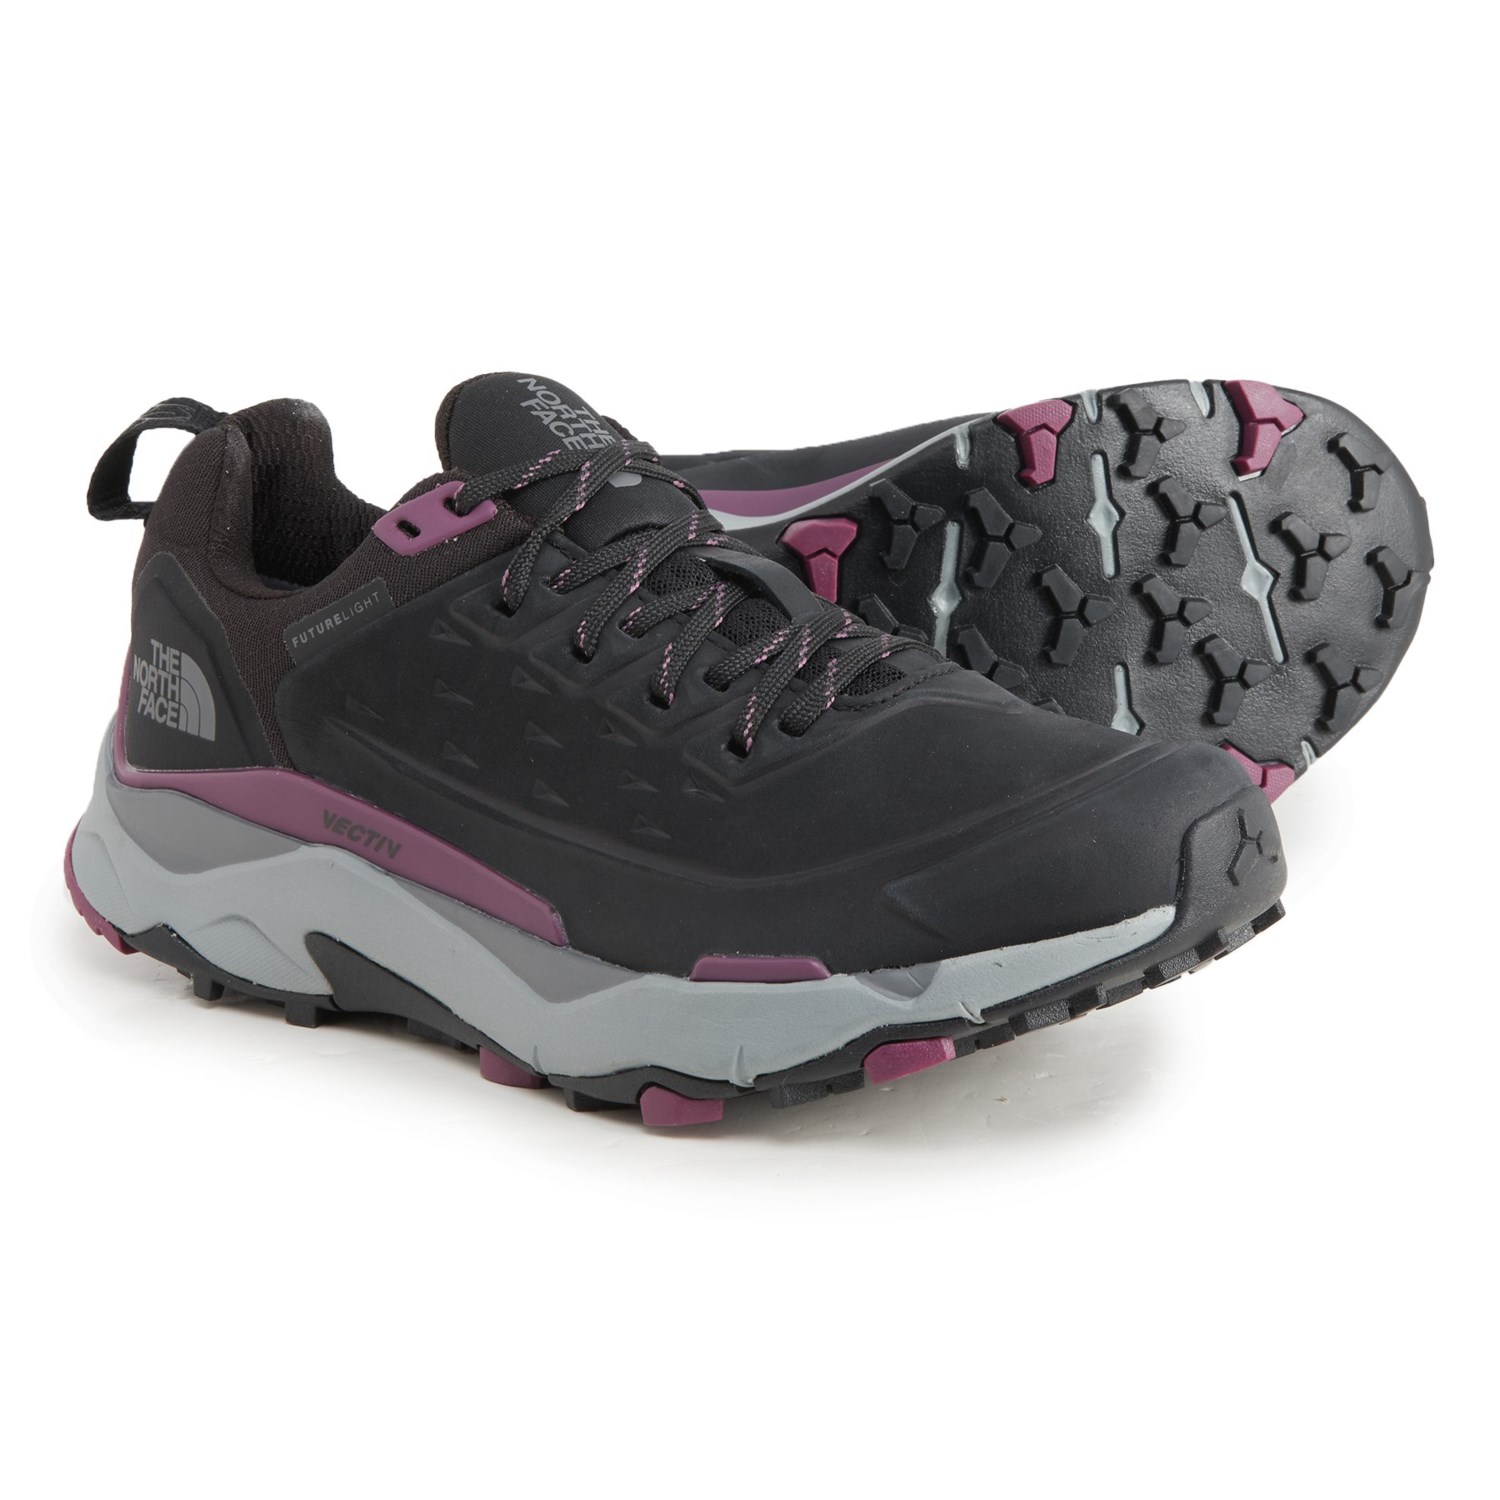 The North Face VECTIV Exploris FUTURELIGHT Hiking Shoes - Waterproof, (For Women)